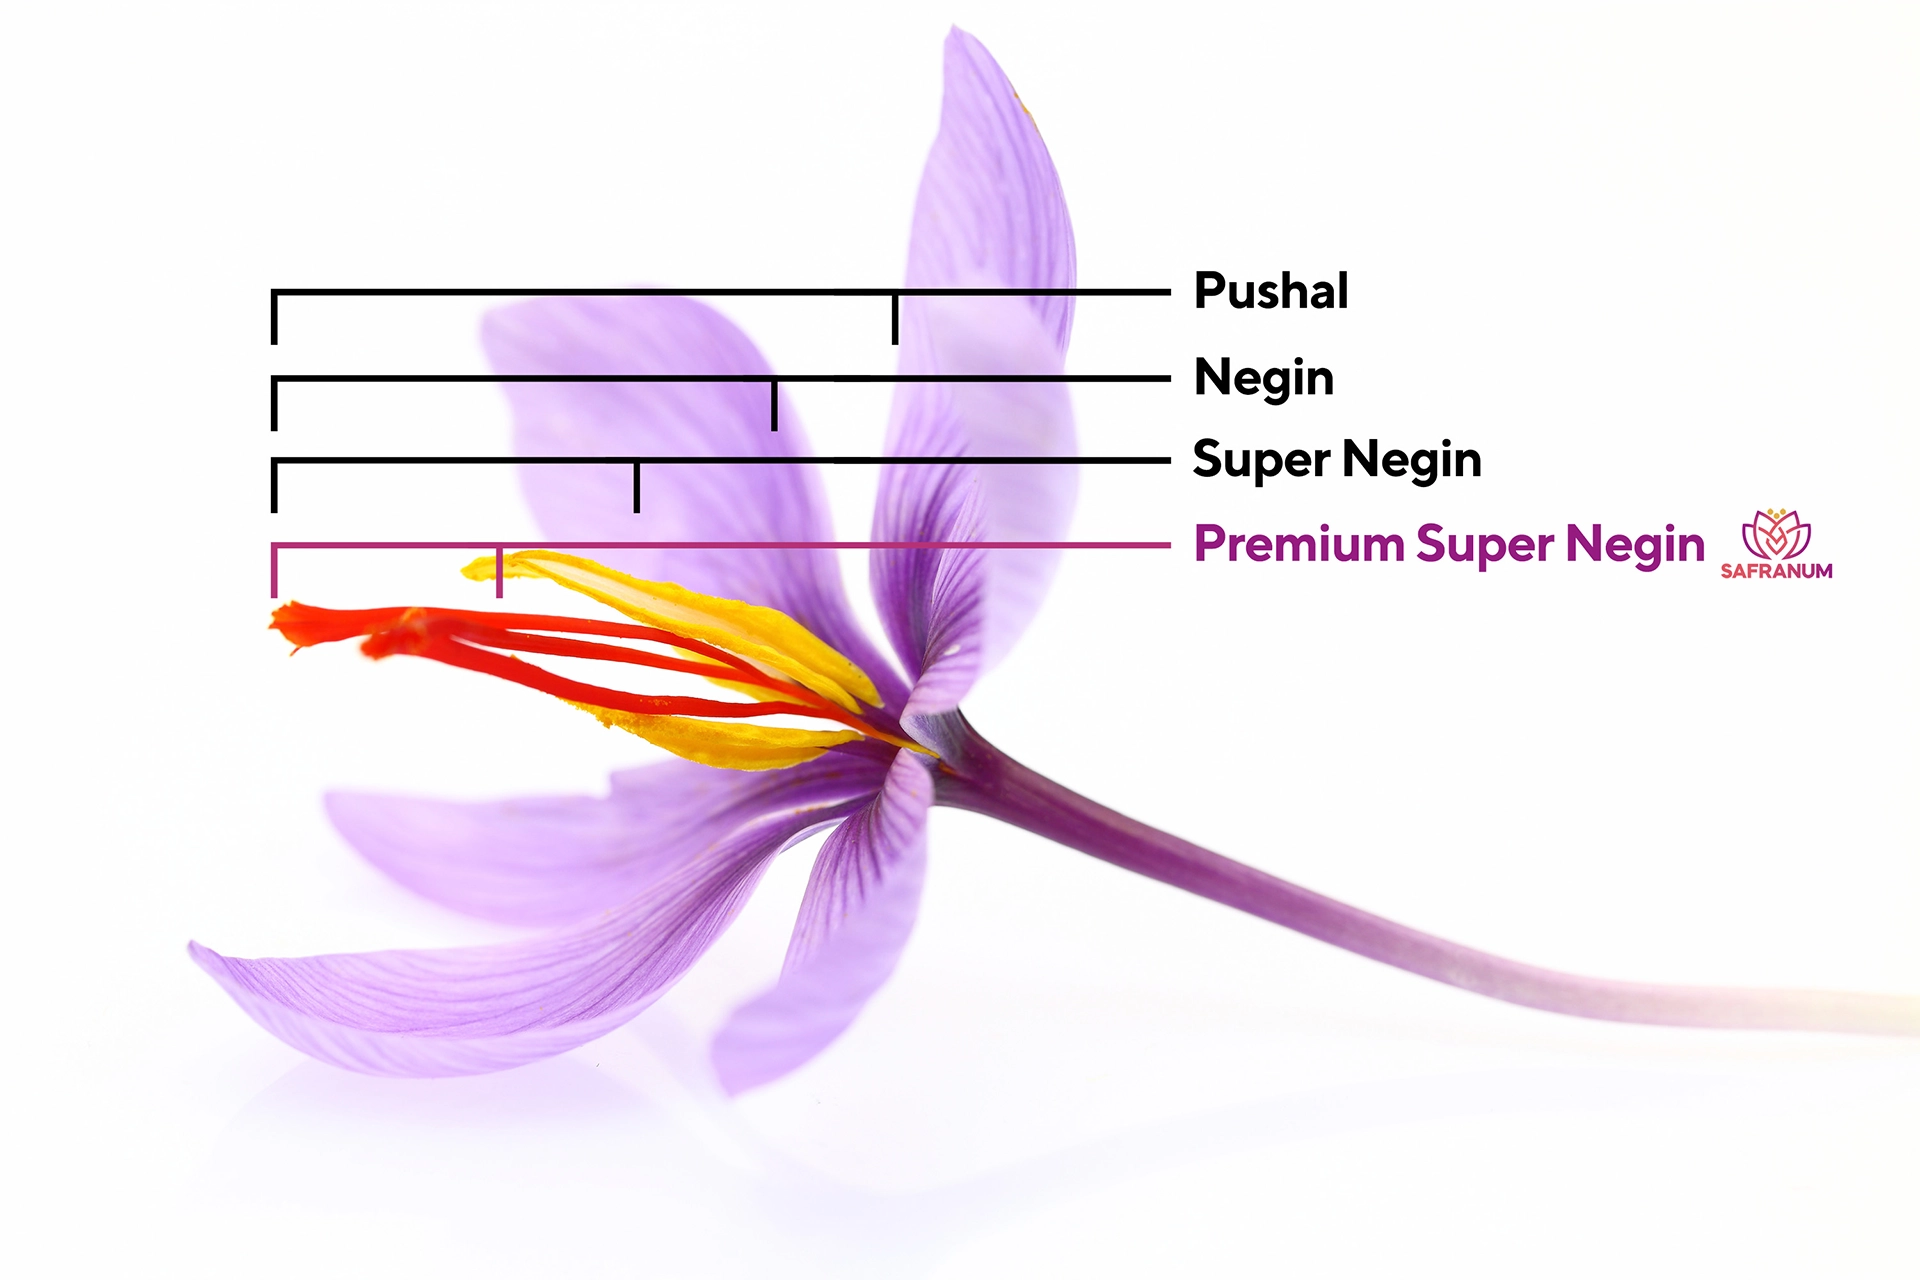 Experience the premium quality of our saffron